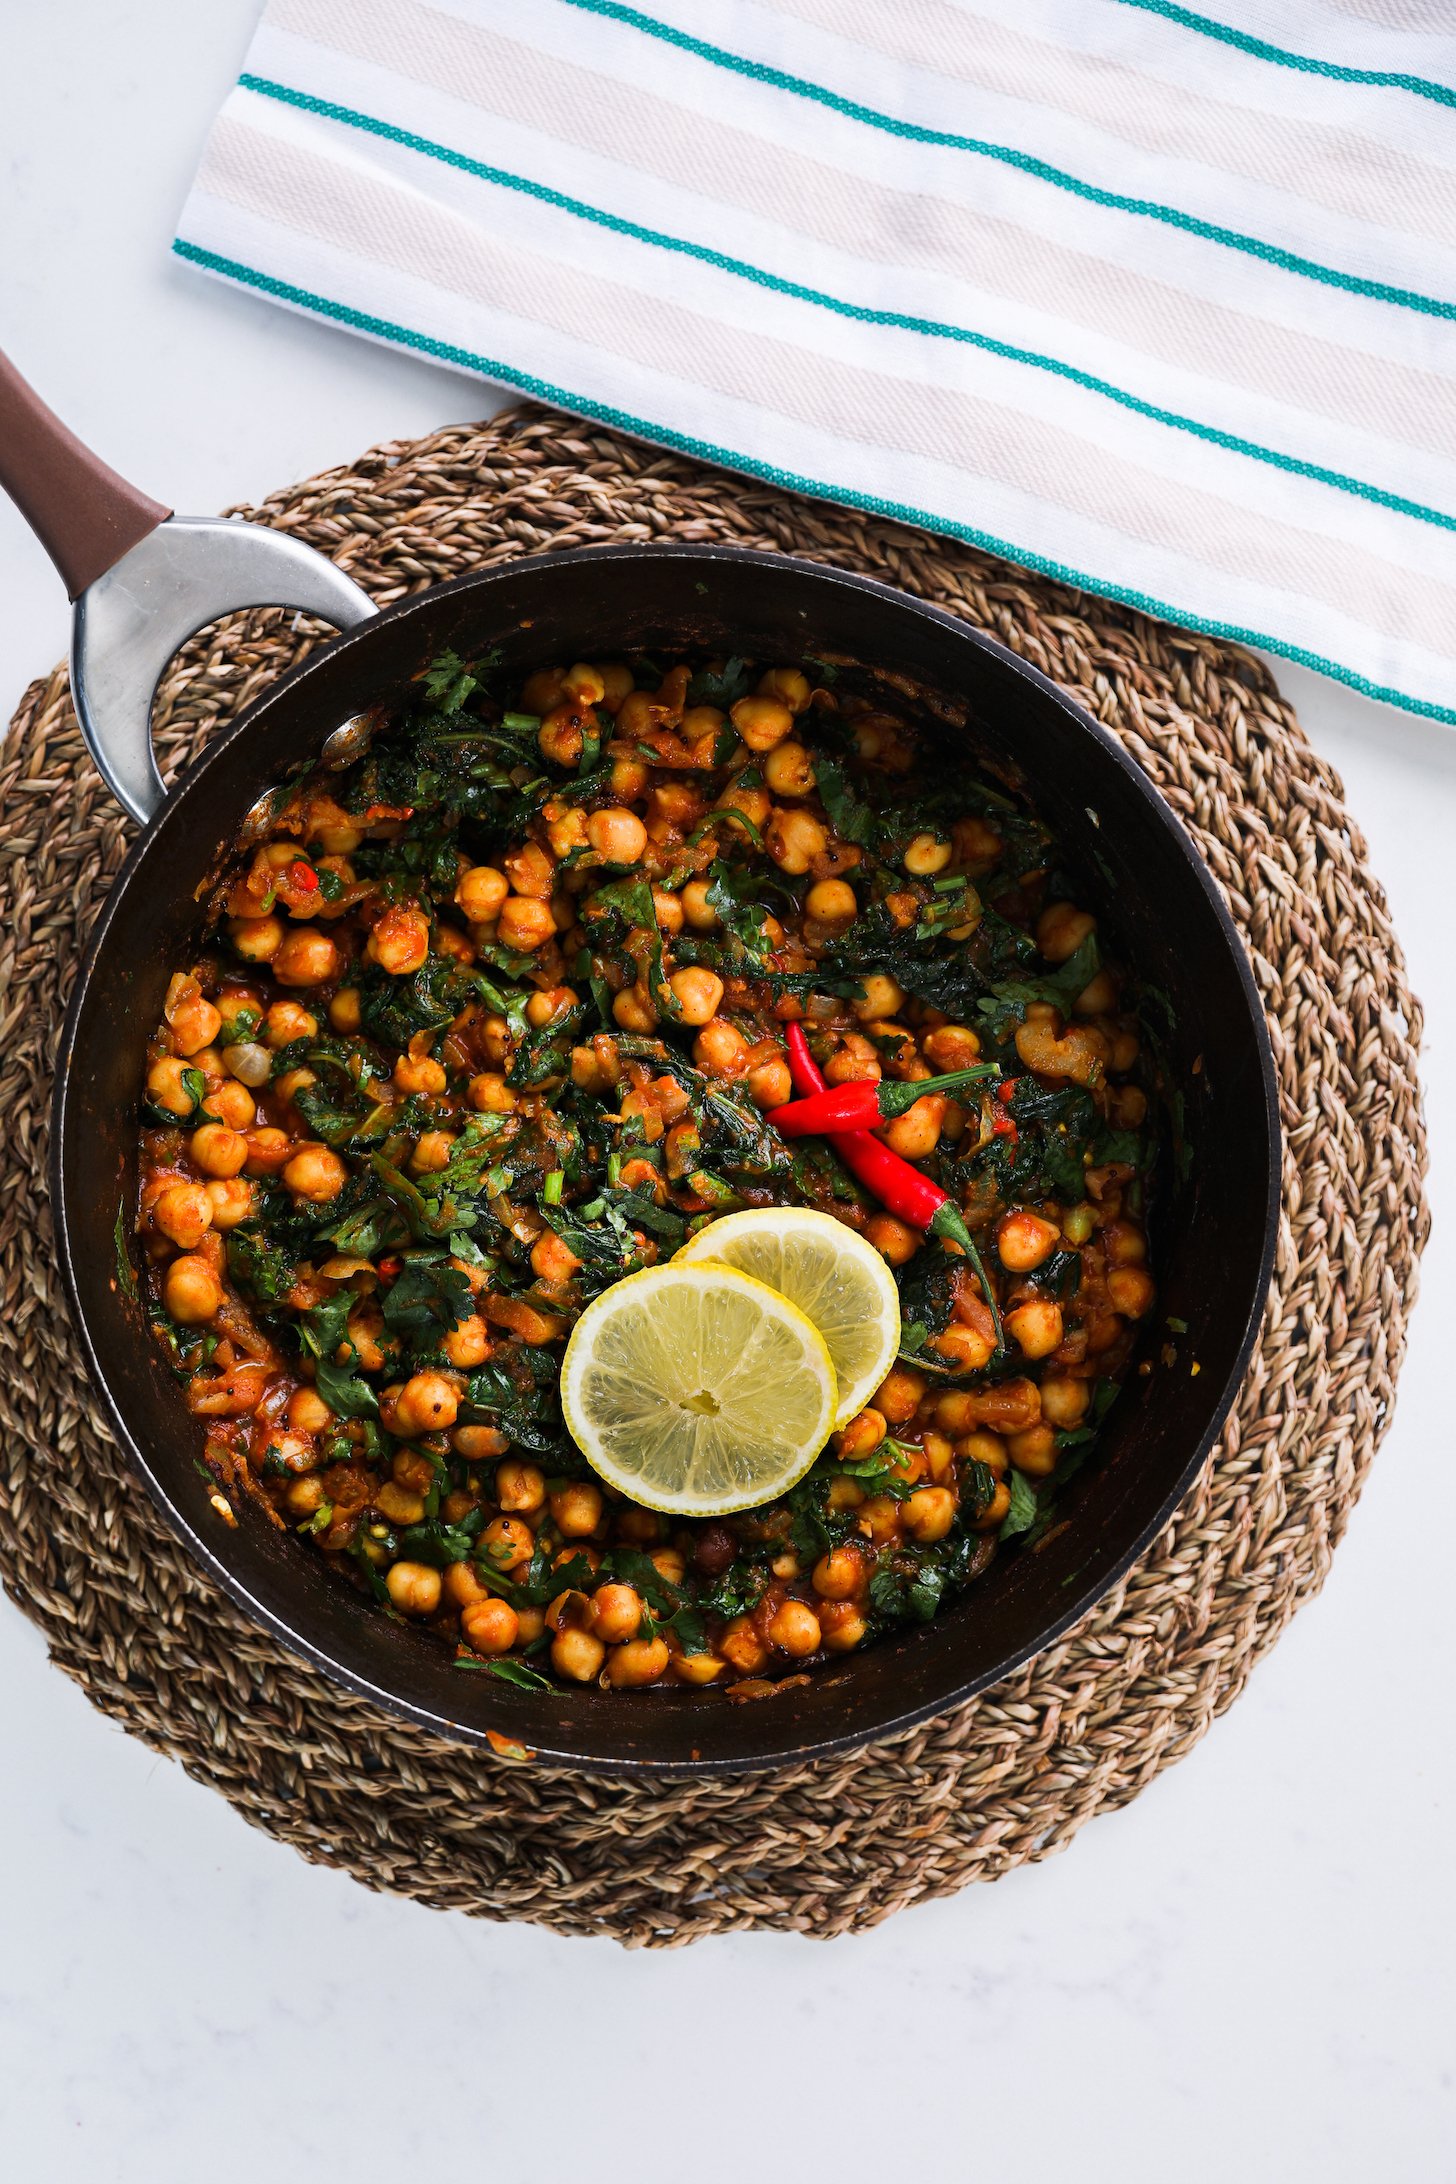 A pan of chickpea and greens curry topped with lemon slices and whole red chillies.